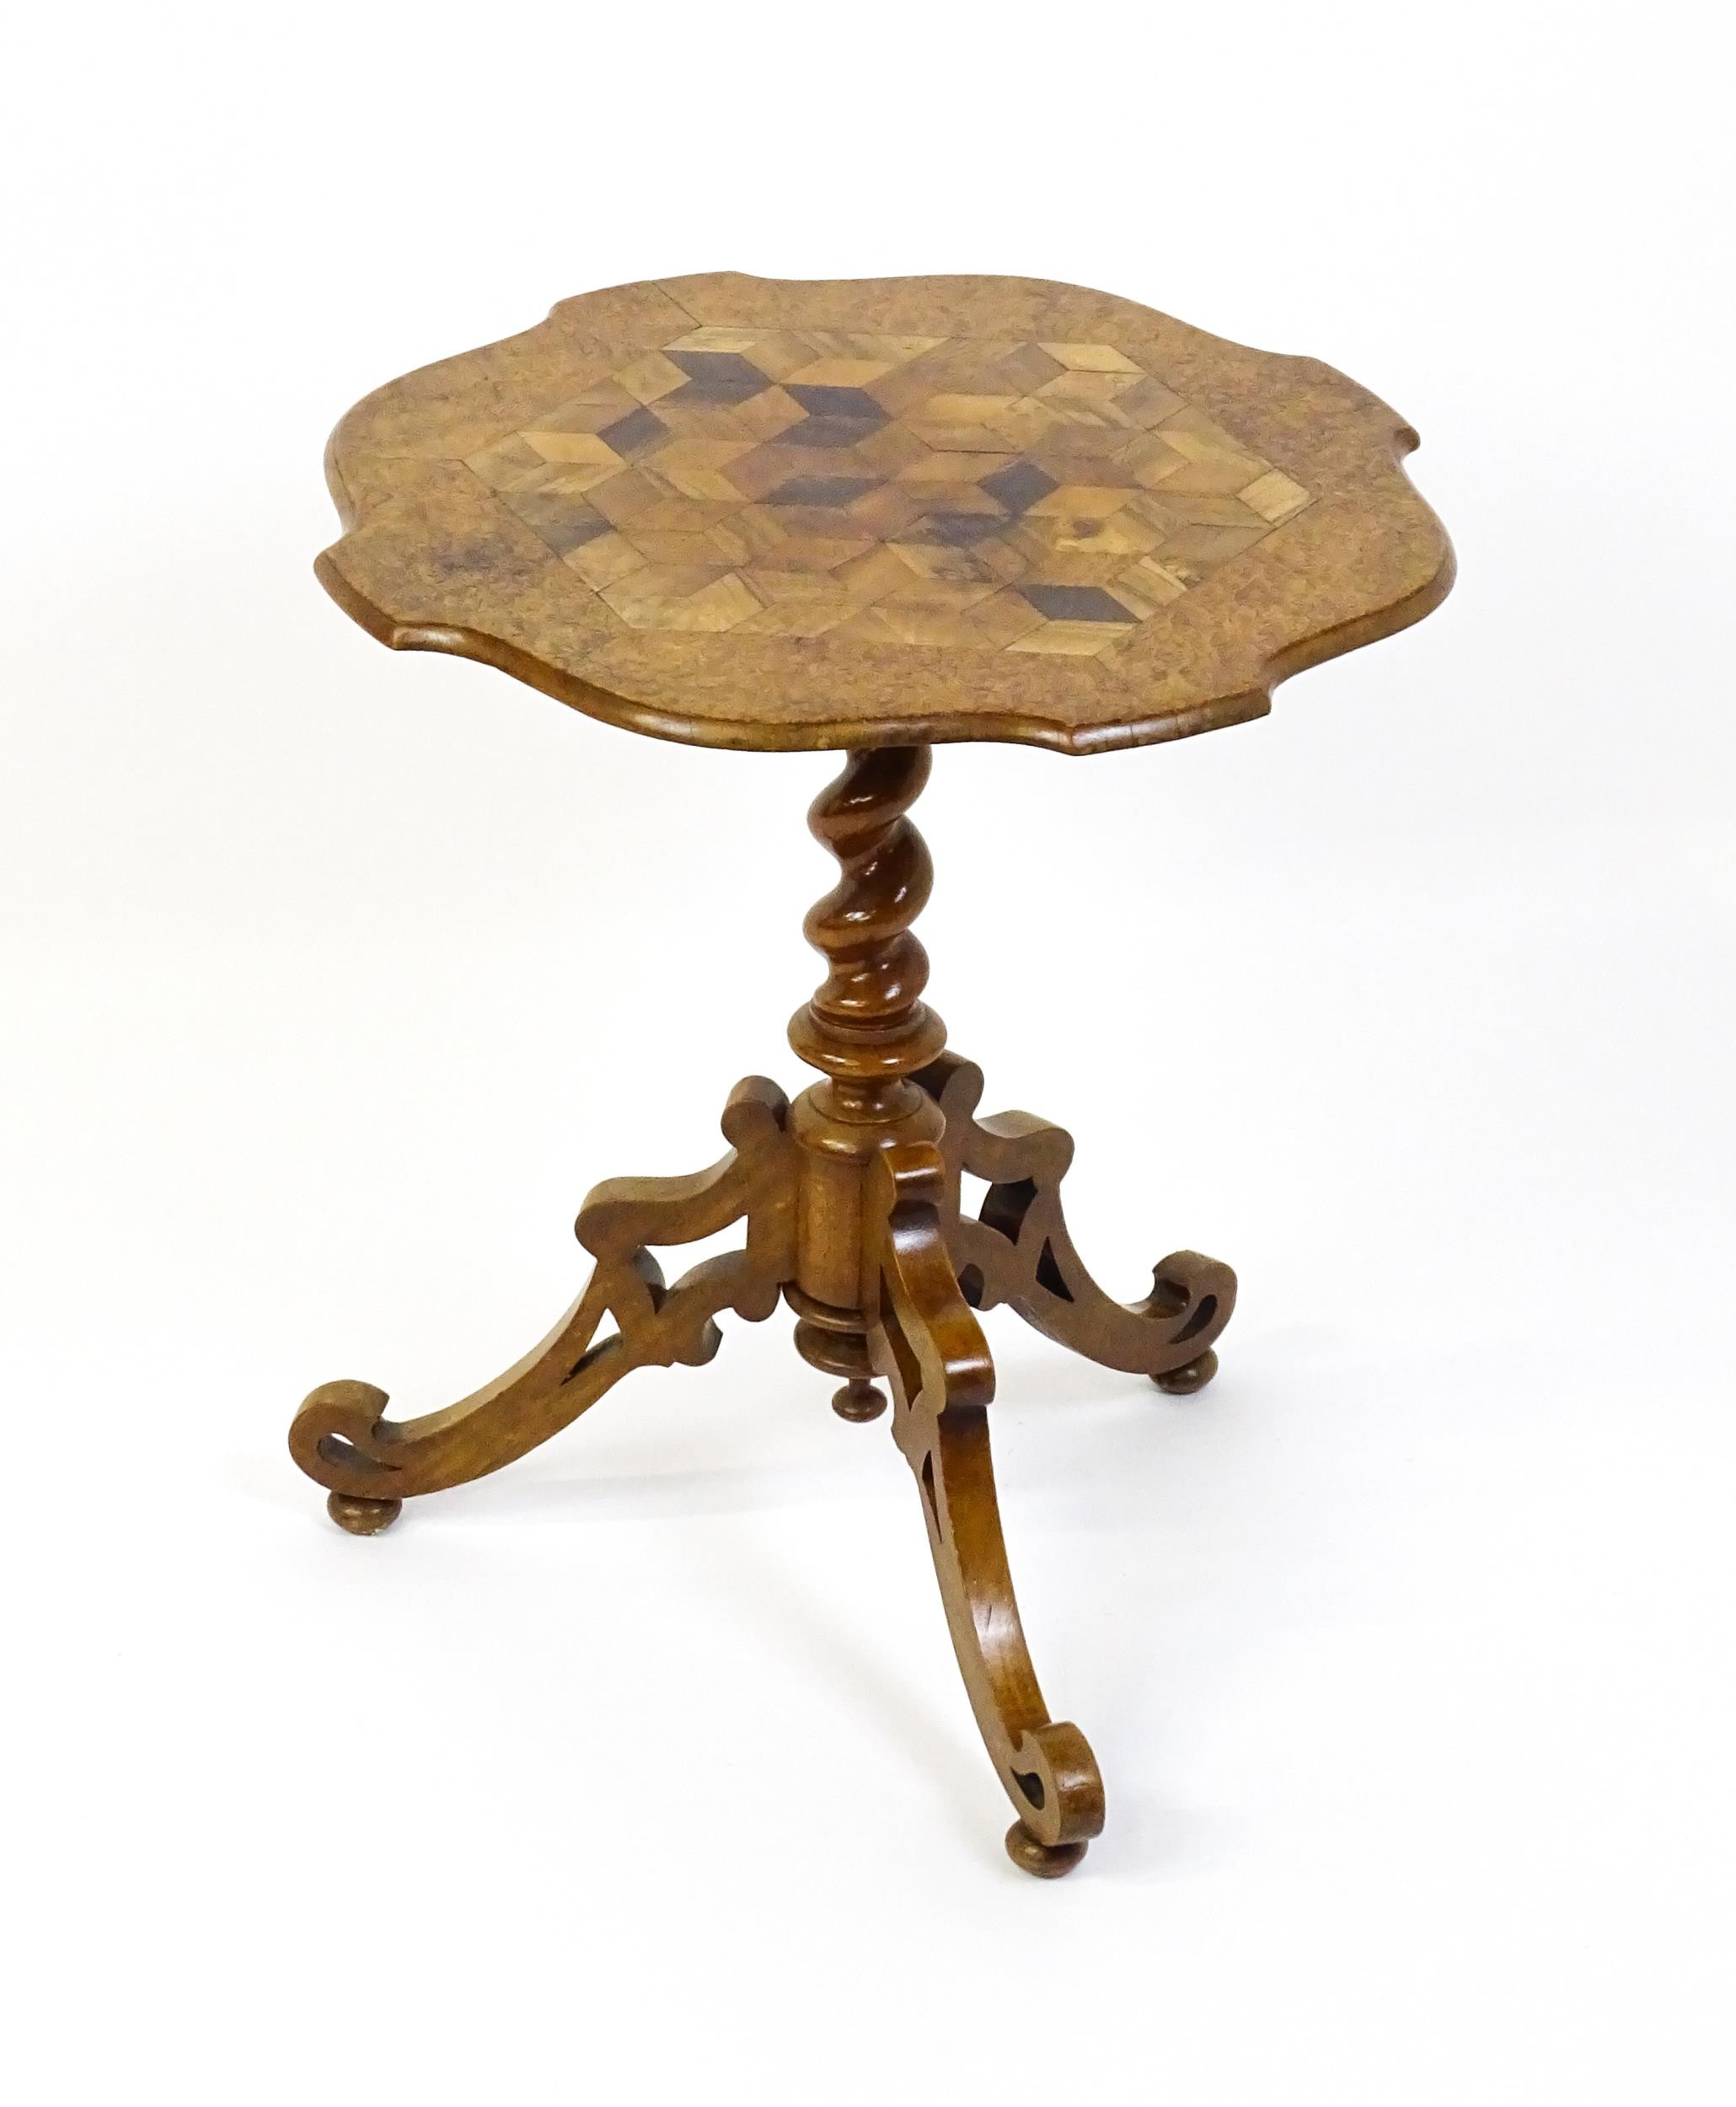 A 19thC tripod table with a burr amboyna veneered top surrounding a central parquetry style sample - Image 2 of 10